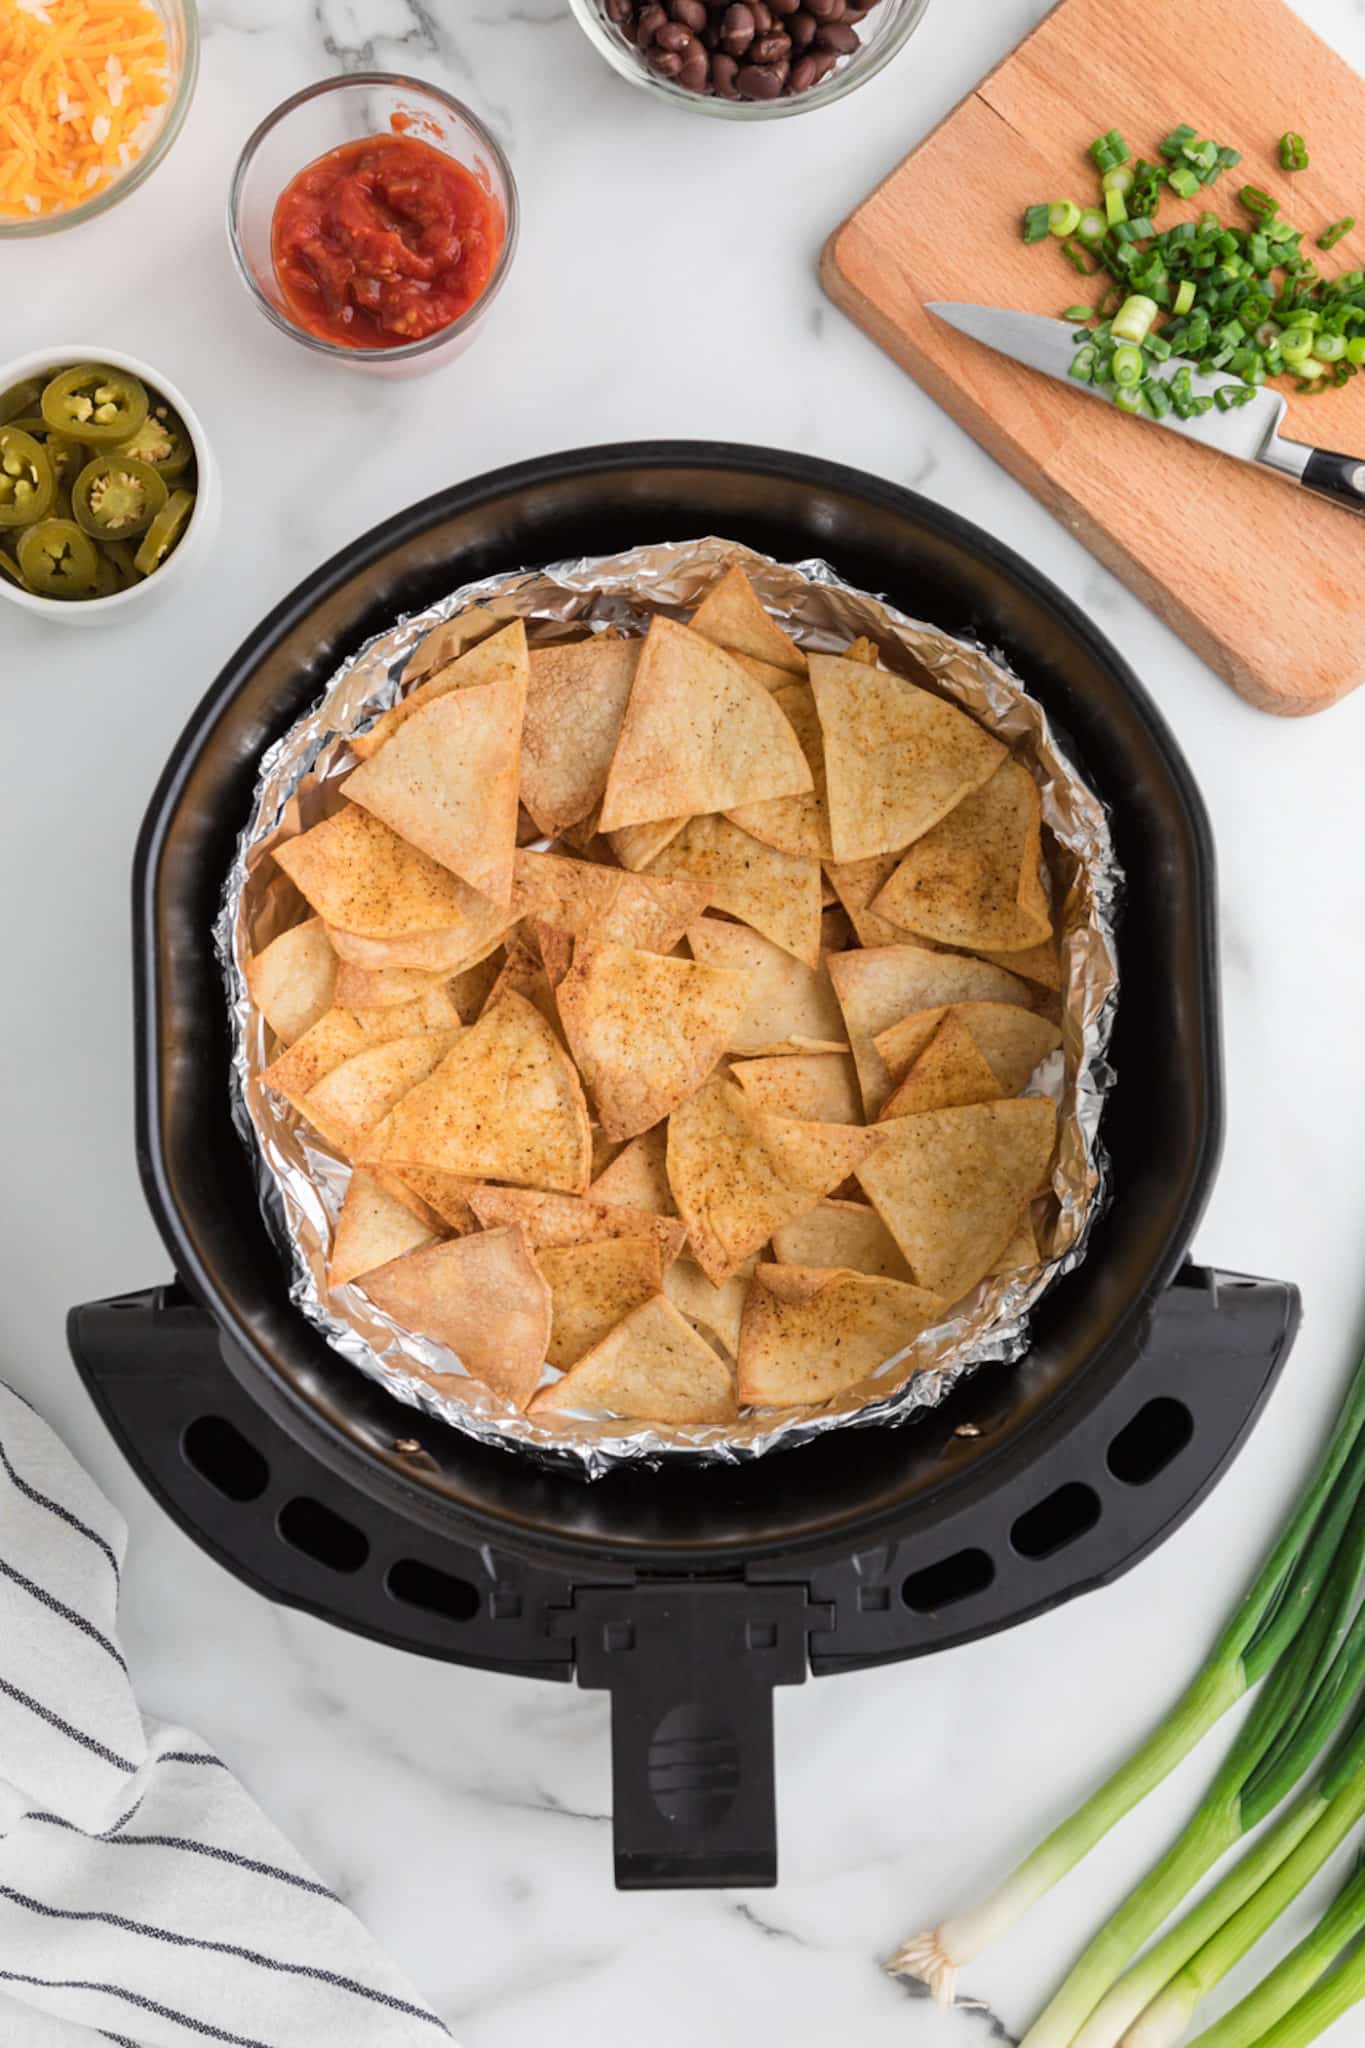 Top view of an air fryer basket lined with foil and filled with homemade tortilla chips.